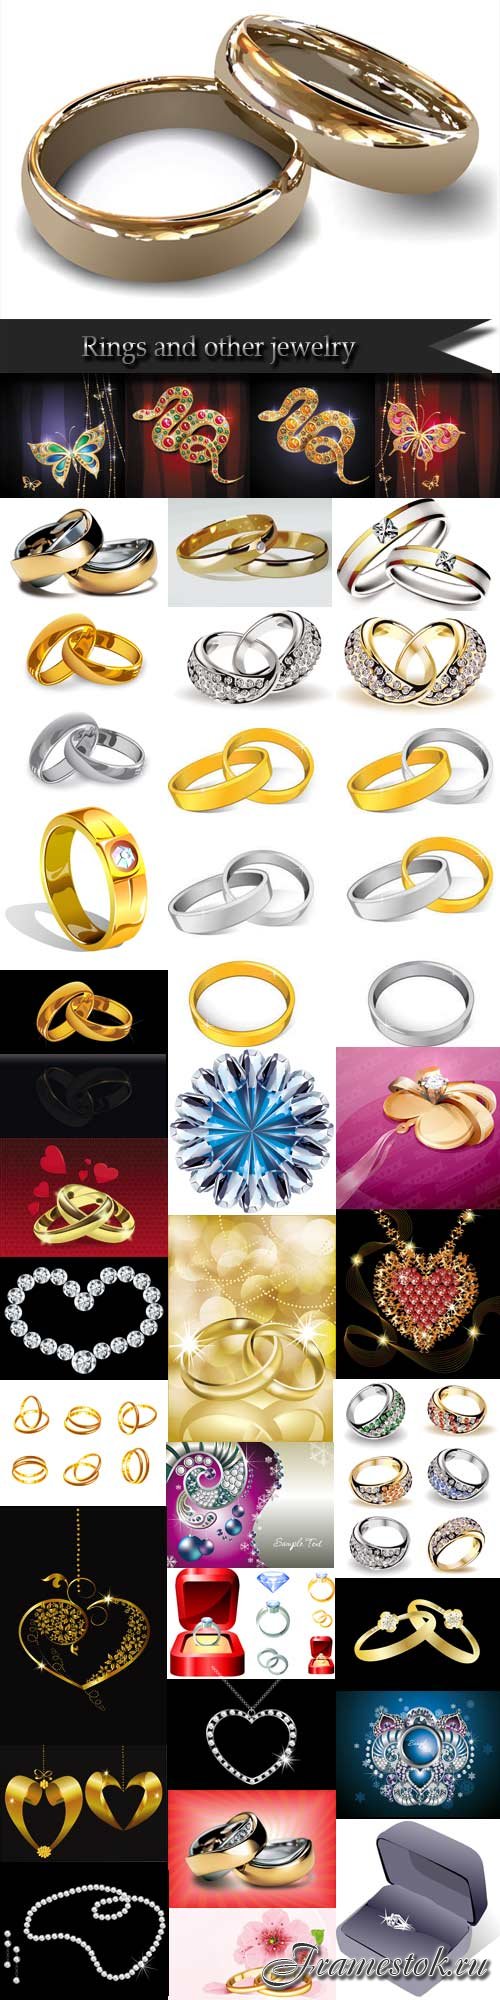 Rings and other jewelry